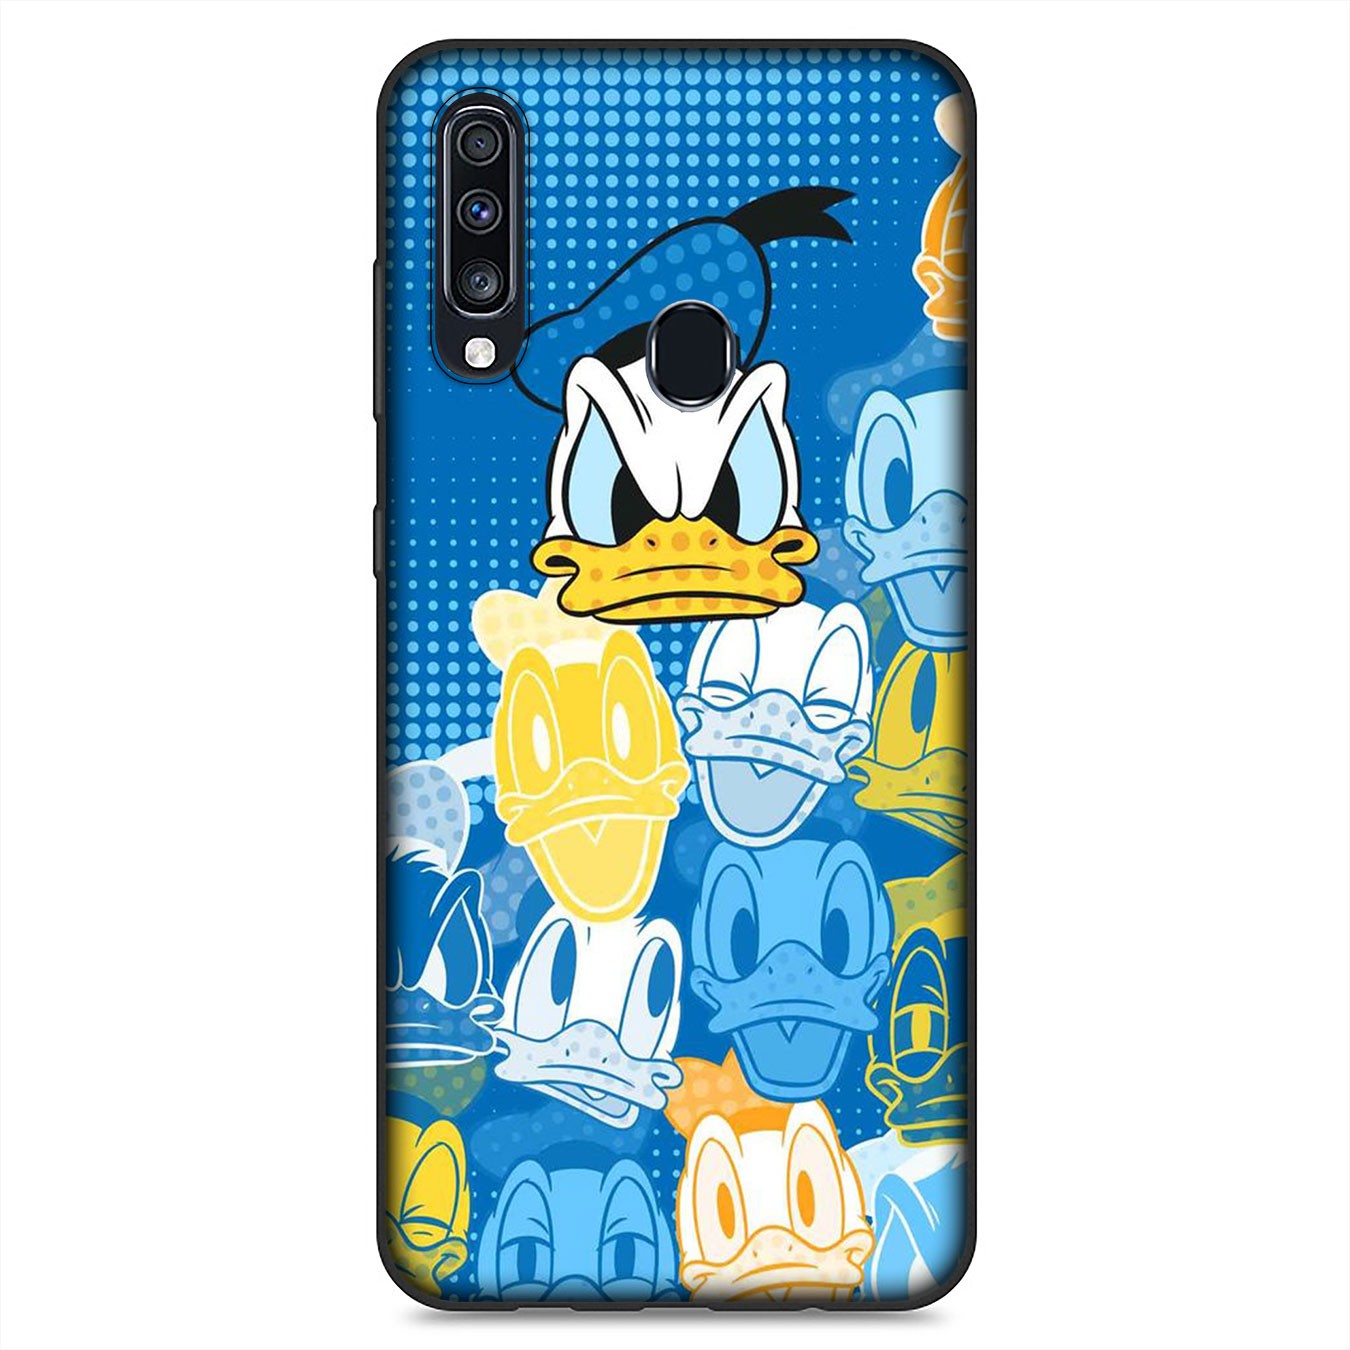 Samsung Galaxy S21 Ultra S8 Plus F62 M62 A2 A32 A52 A72 S21+ S8+ S21Plus Casing Soft Silicone Phone Case Mickey Mouse Donald Duck Cover